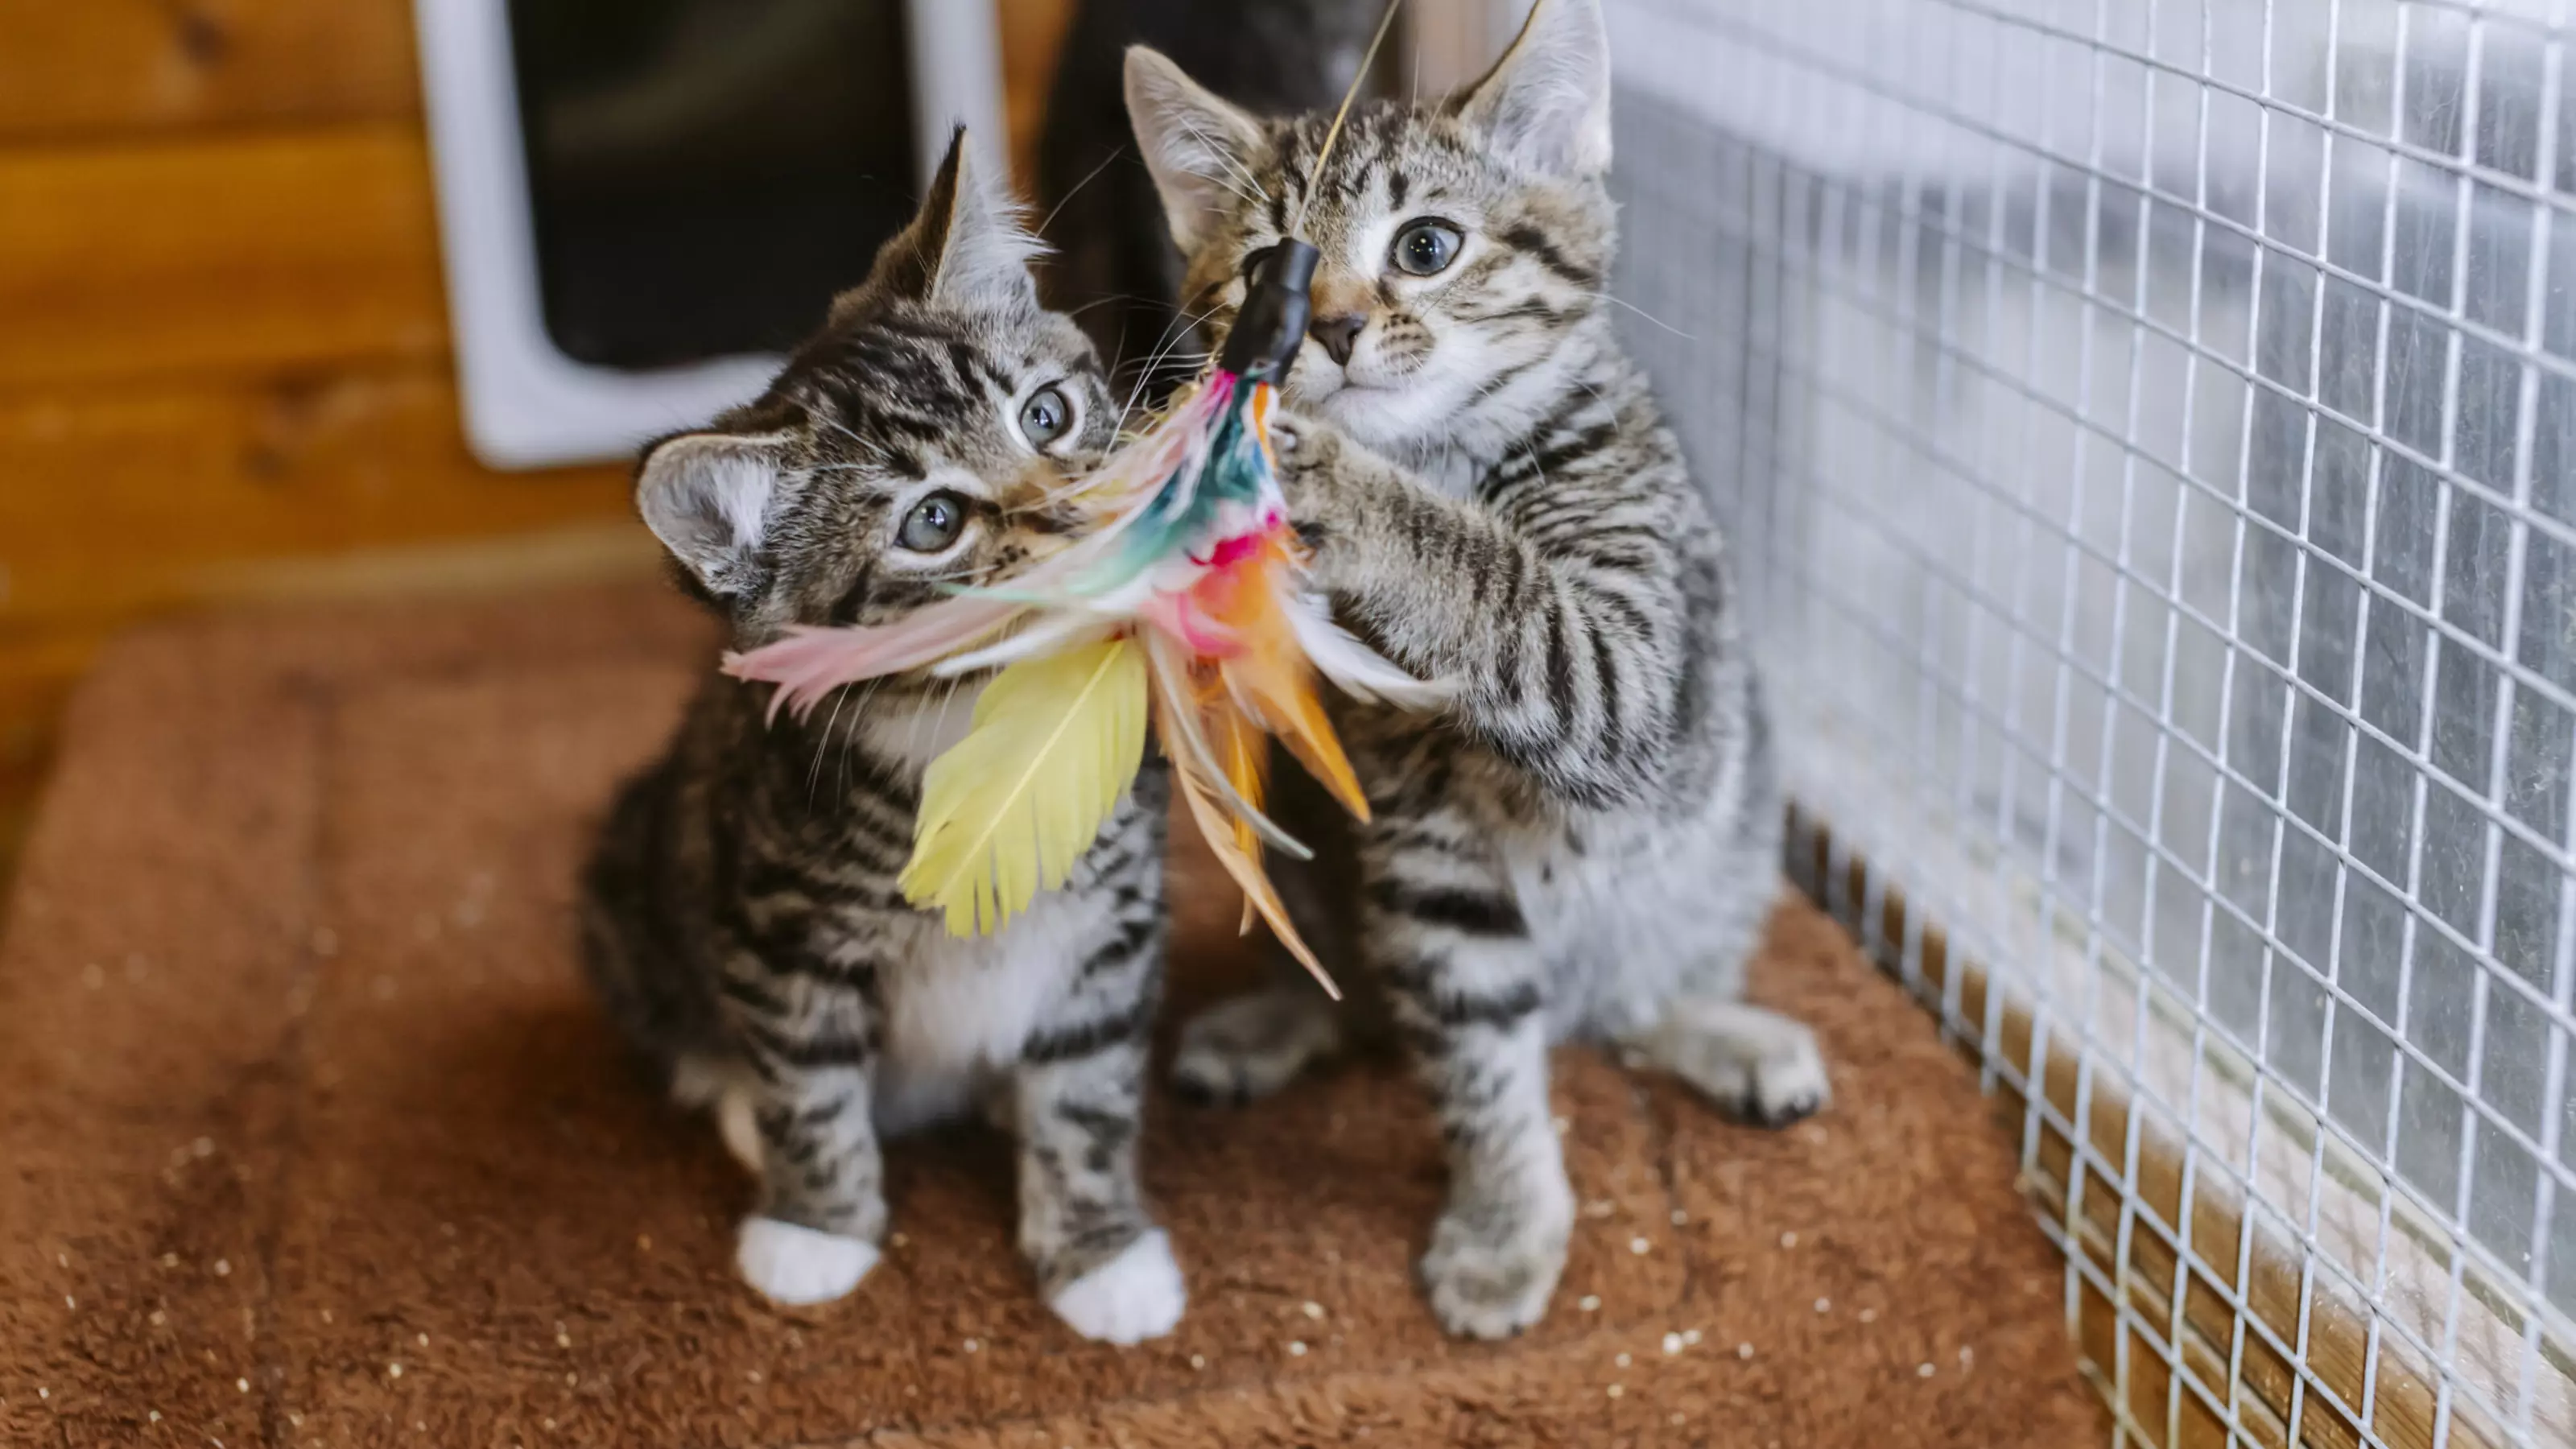 Two of the kittens playing in their cat chalet with a feather rod toy